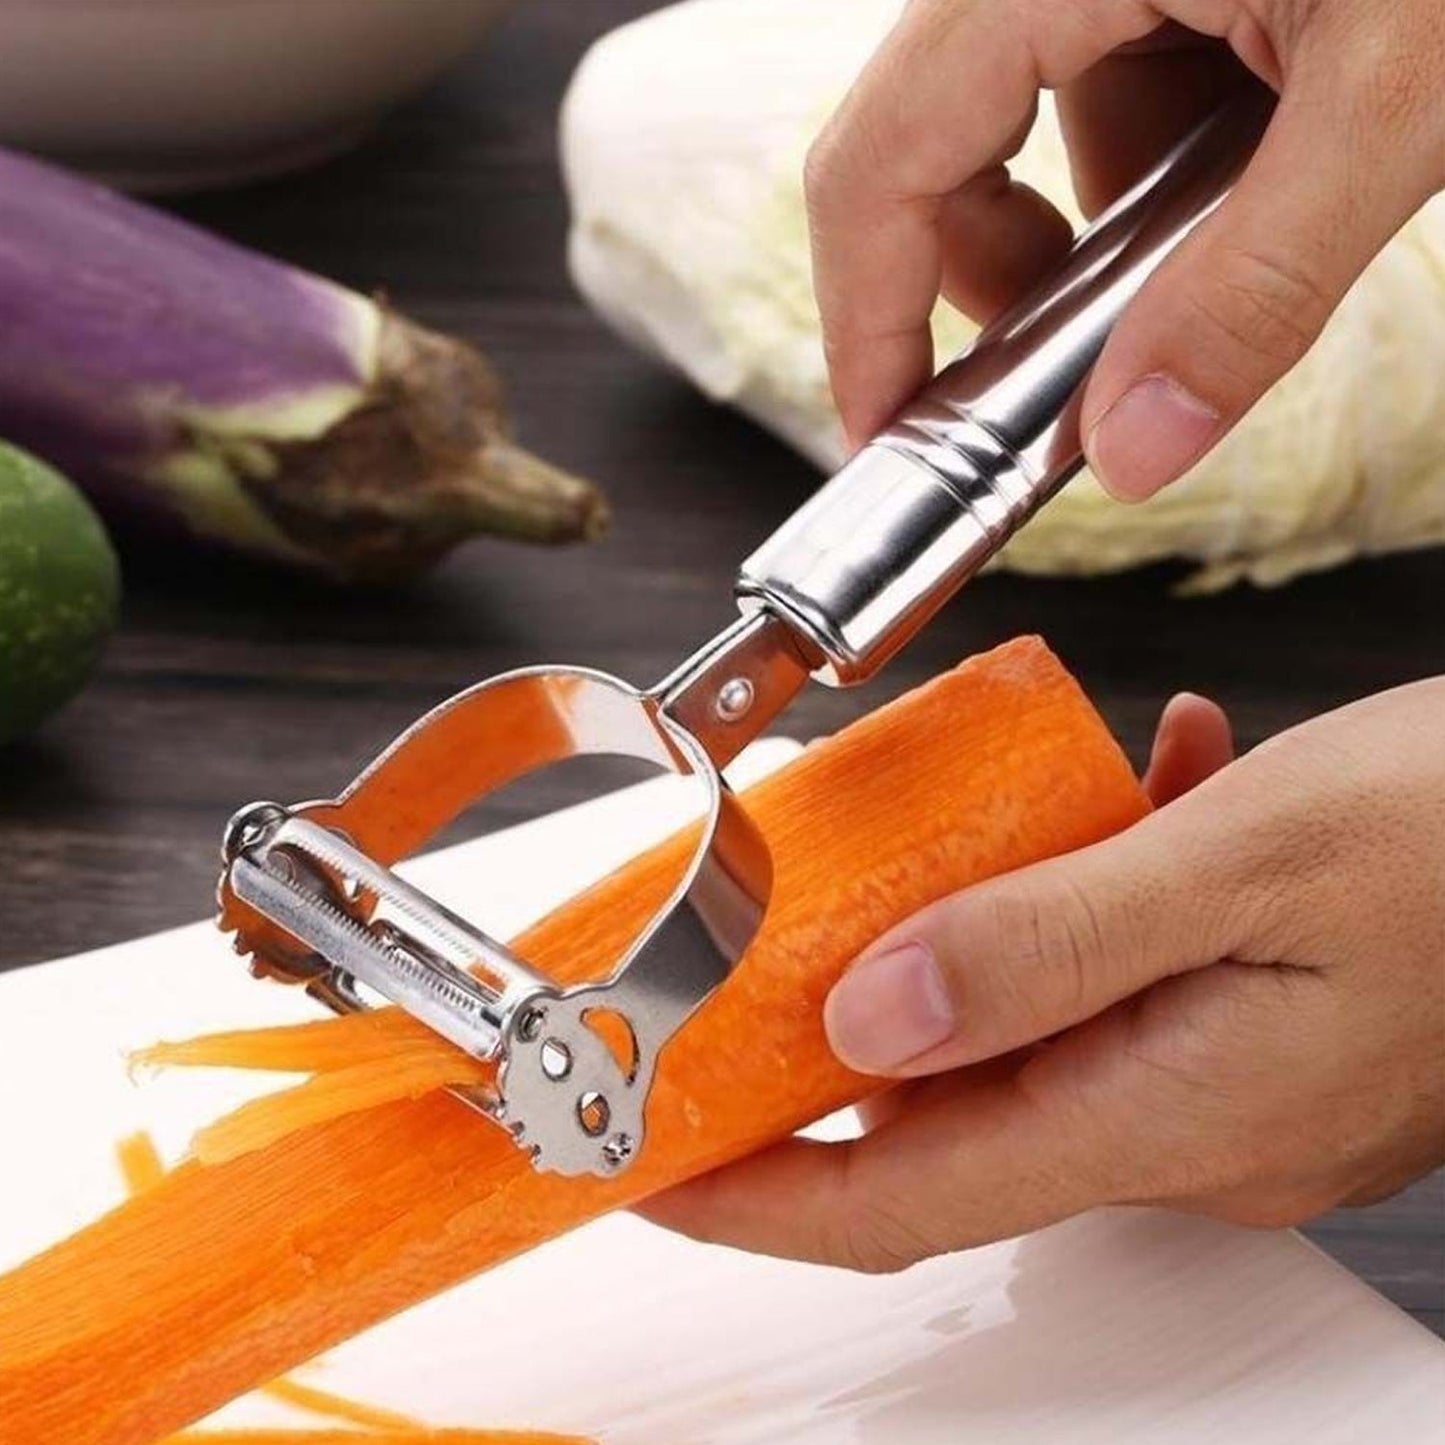 5505 Multi-Function 2 in 1 Potato Peeler and Julienne Cutter, Stainless Steel Potato Peeler, grated Carrot, grated, Suitable for Peeling and shredding Fruit and Vegetables Kitchen Accessories (1 Pc)